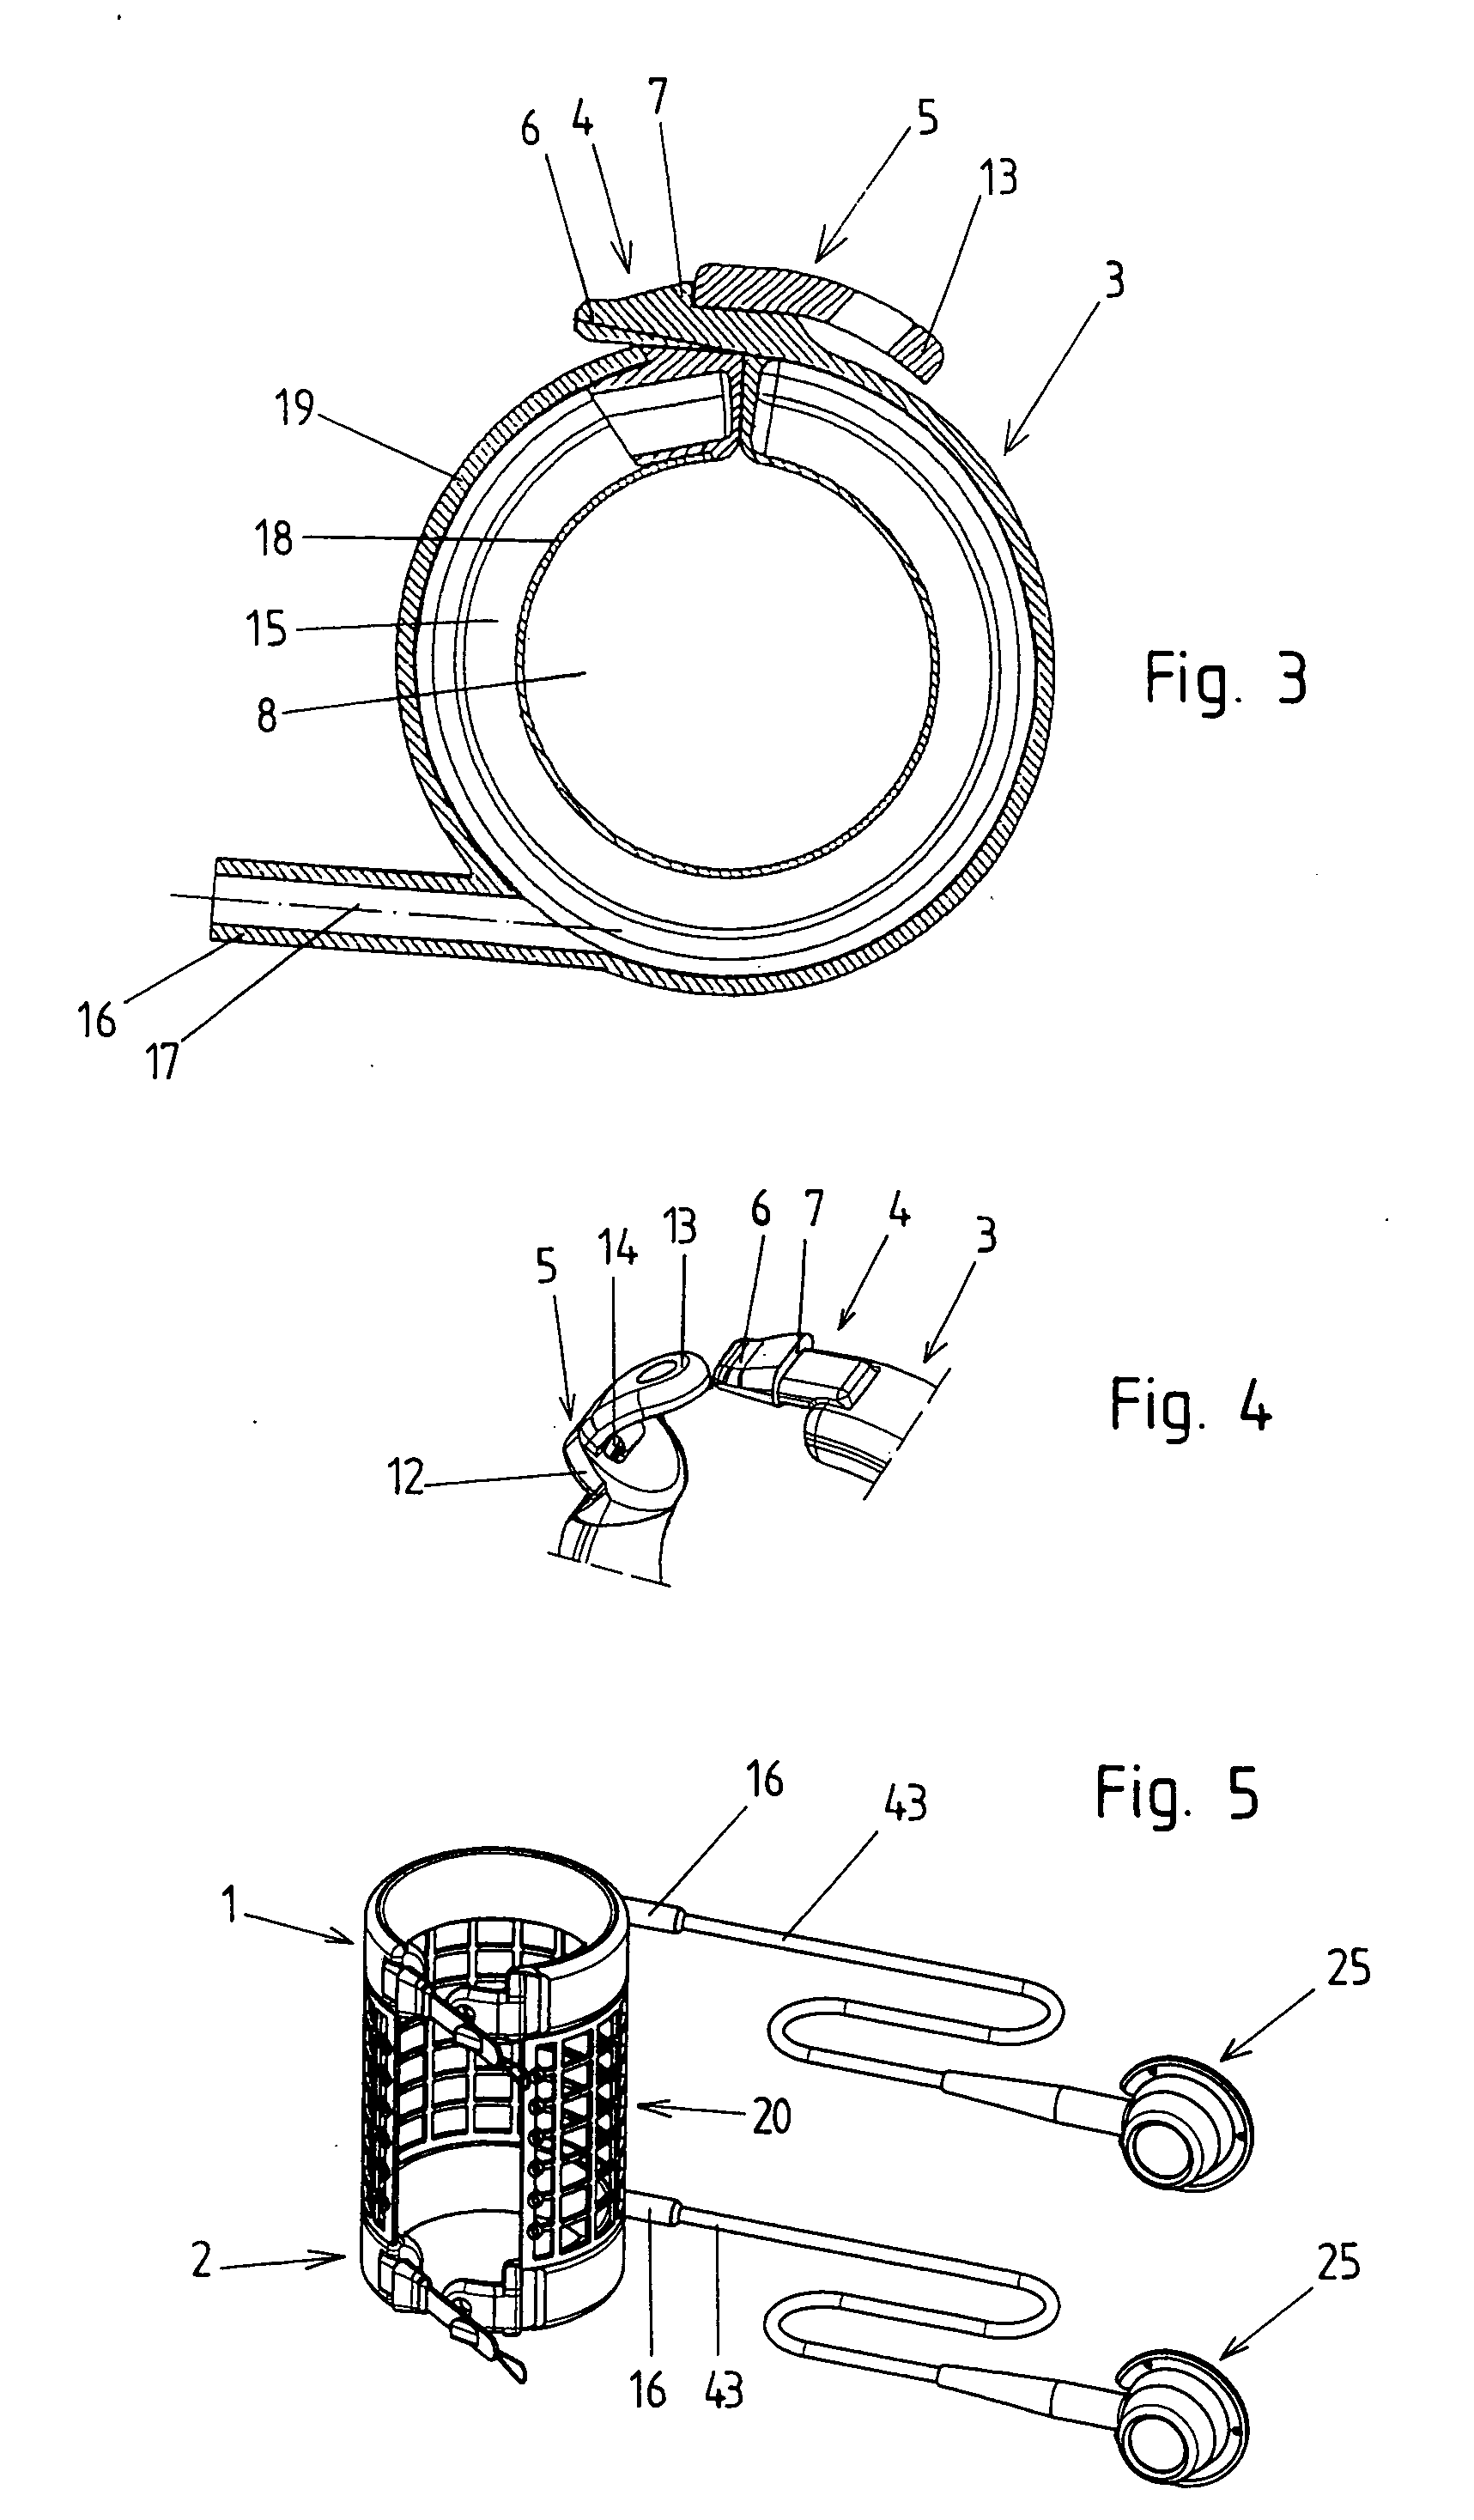 Device for the treatment of obesity